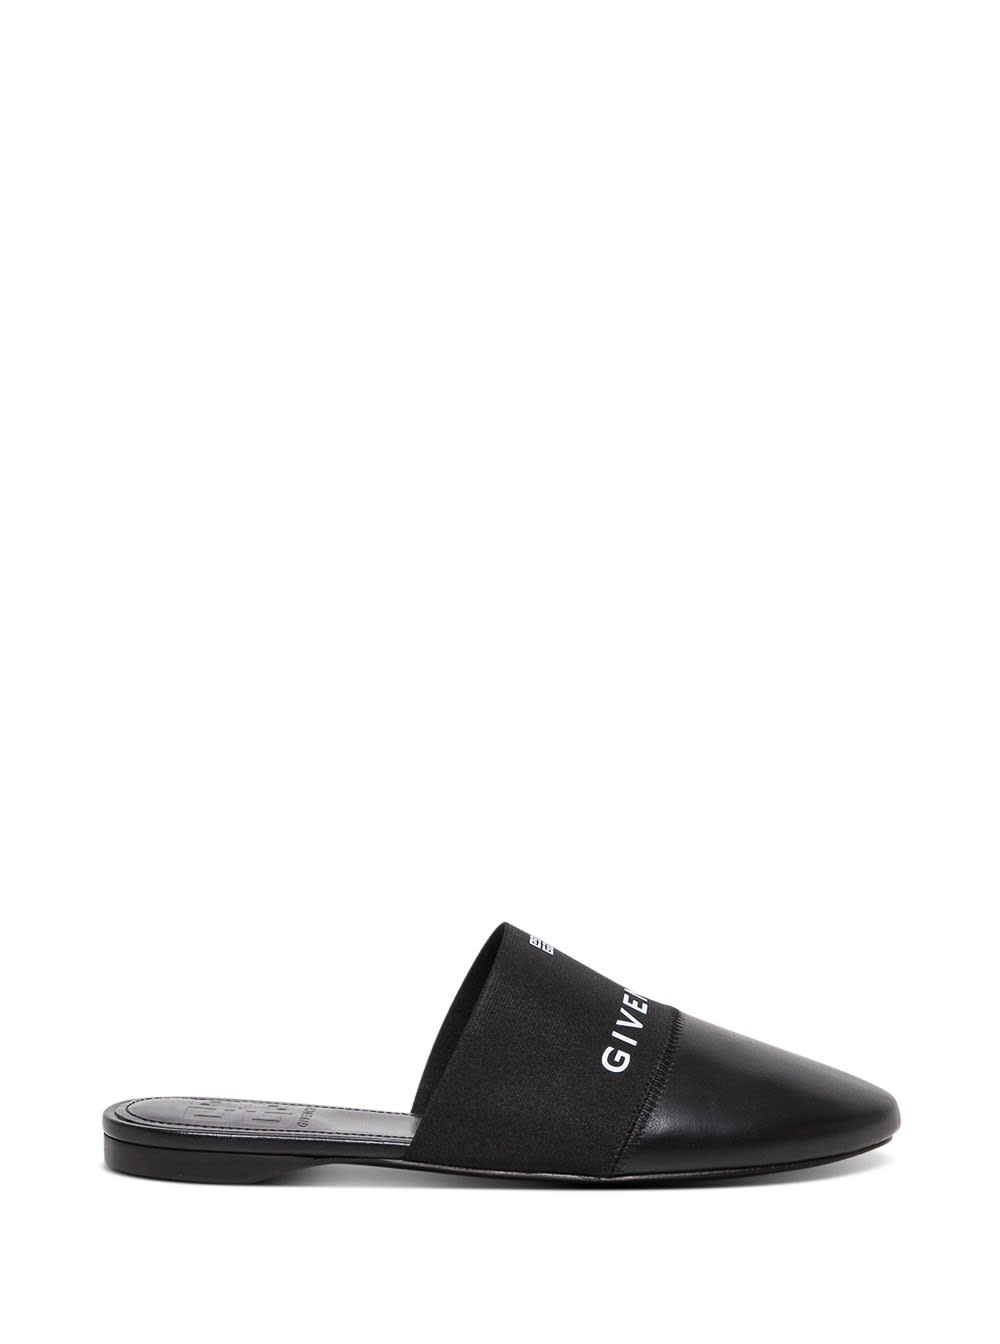 Buy Givenchy 4g Flat Mules In Black Leather online, shop Givenchy shoes with free shipping